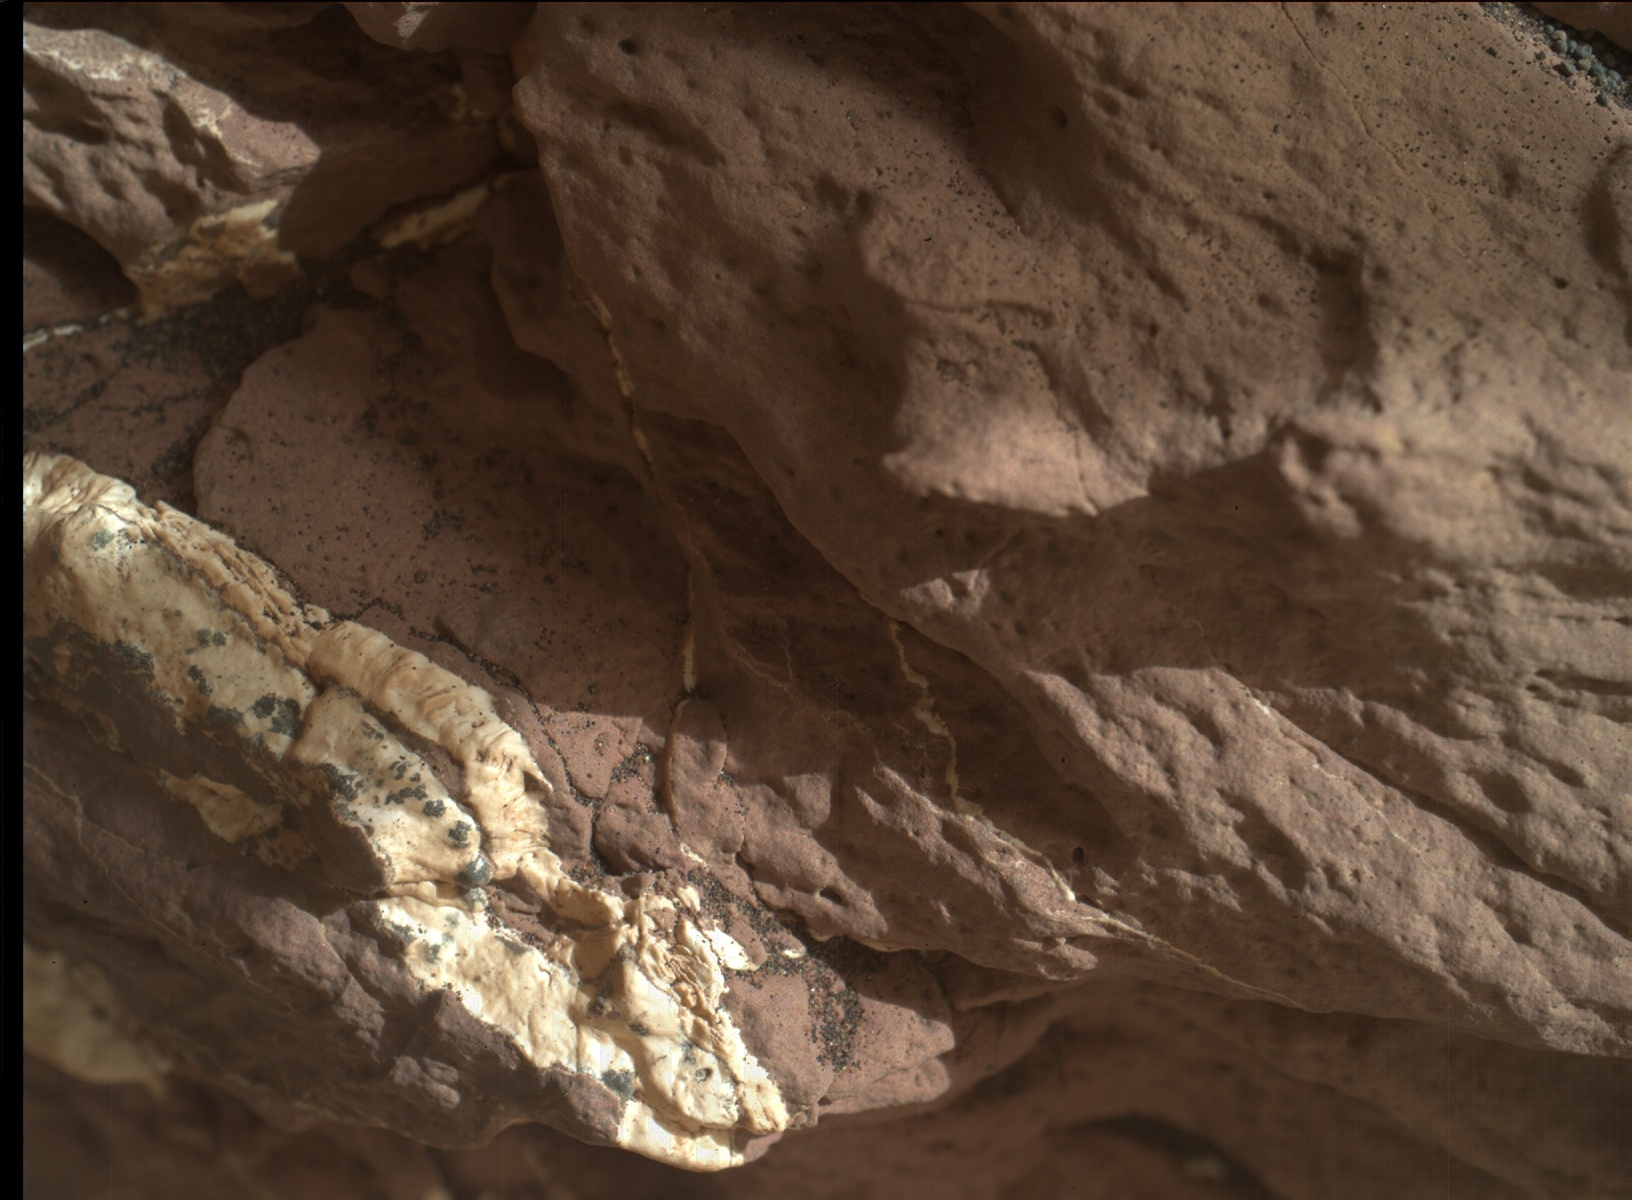 Nasa's Mars rover Curiosity acquired this image using its Mars Hand Lens Imager (MAHLI) on Sol 1514